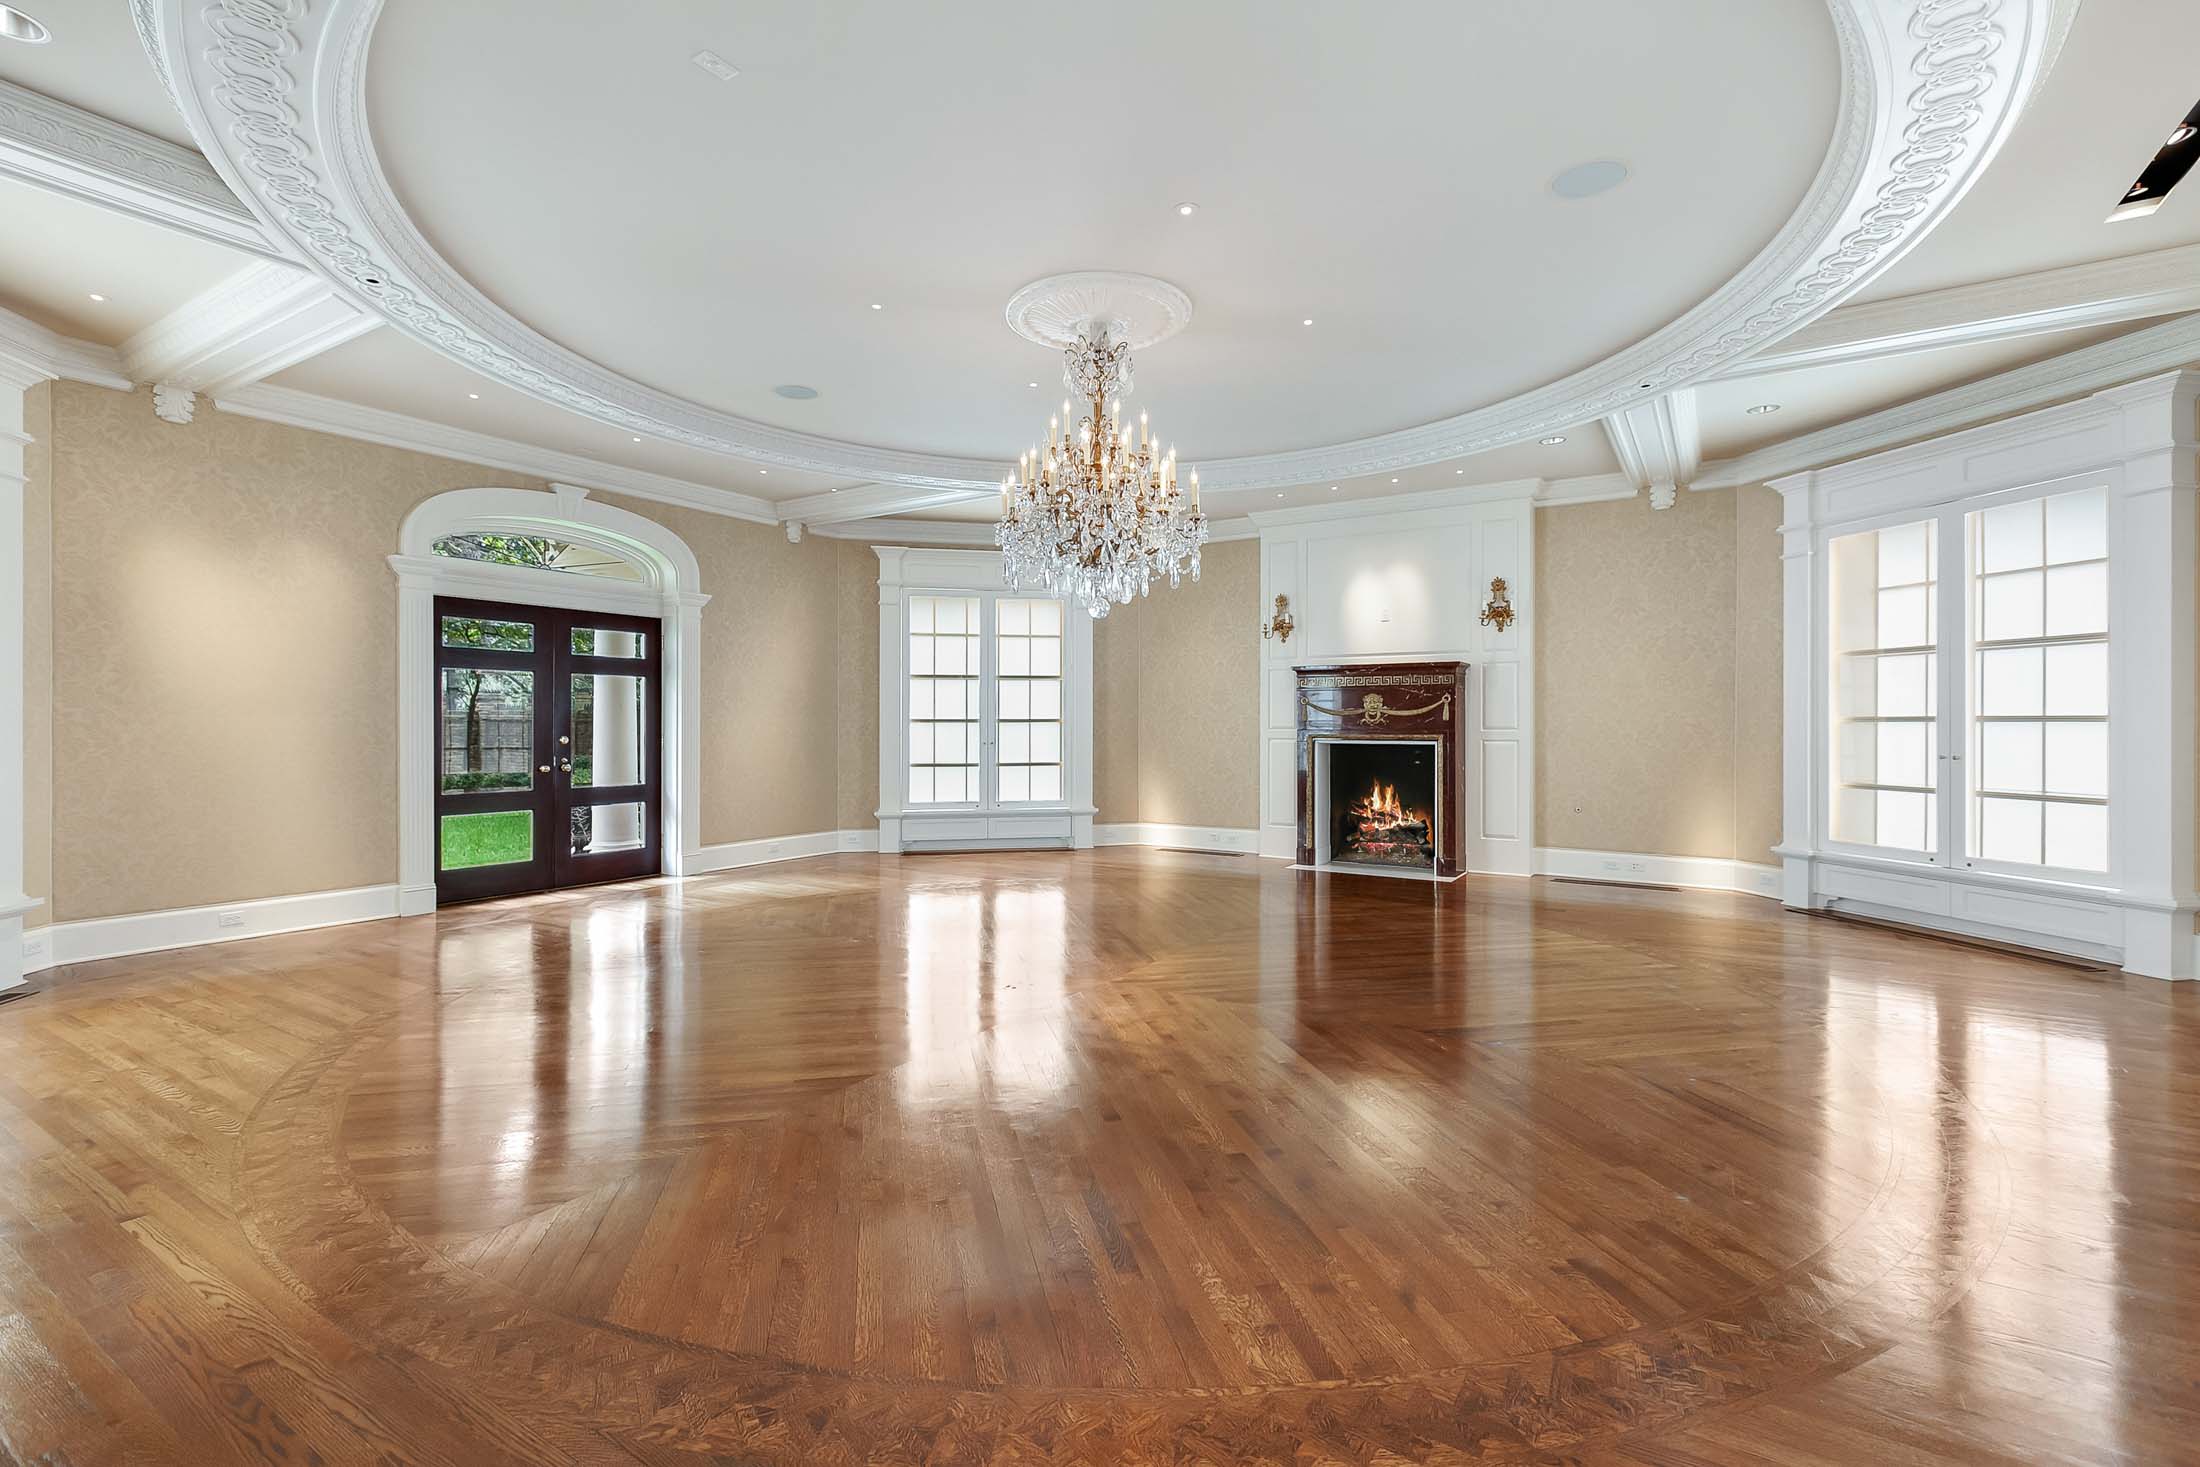 2308 Woodlawn Blvd - Estate Circular Room with Crown Molding and Fireplace